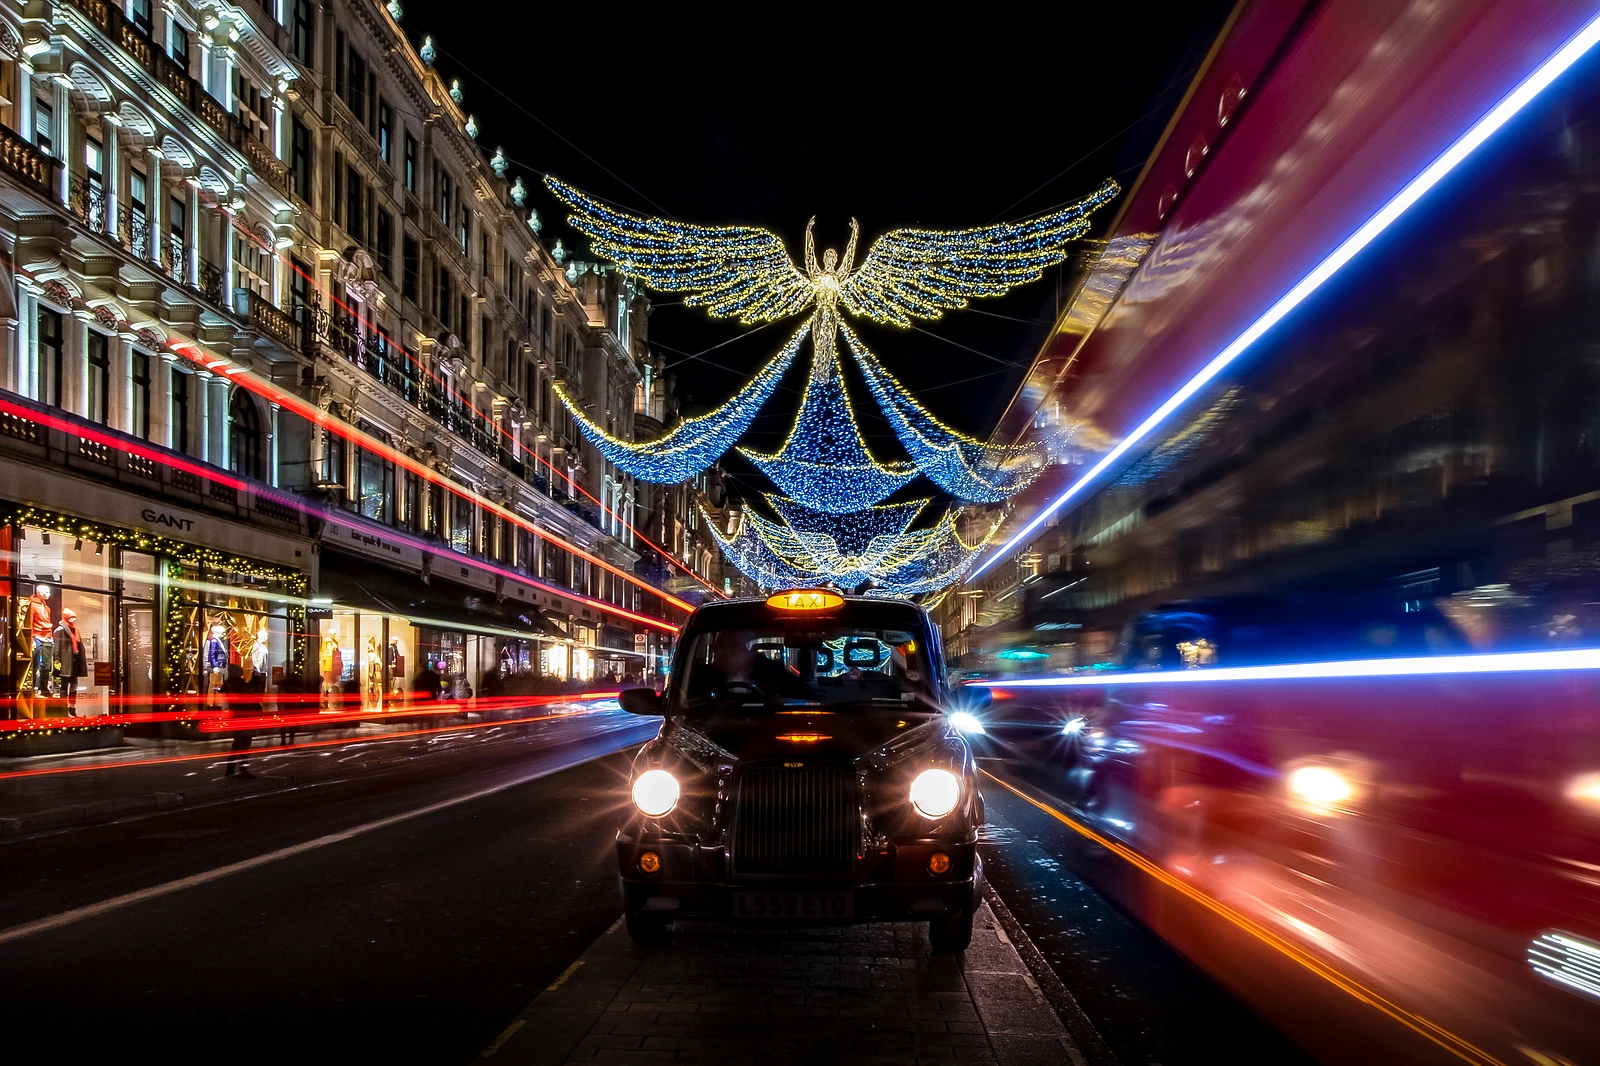 London's West End Christmas lights